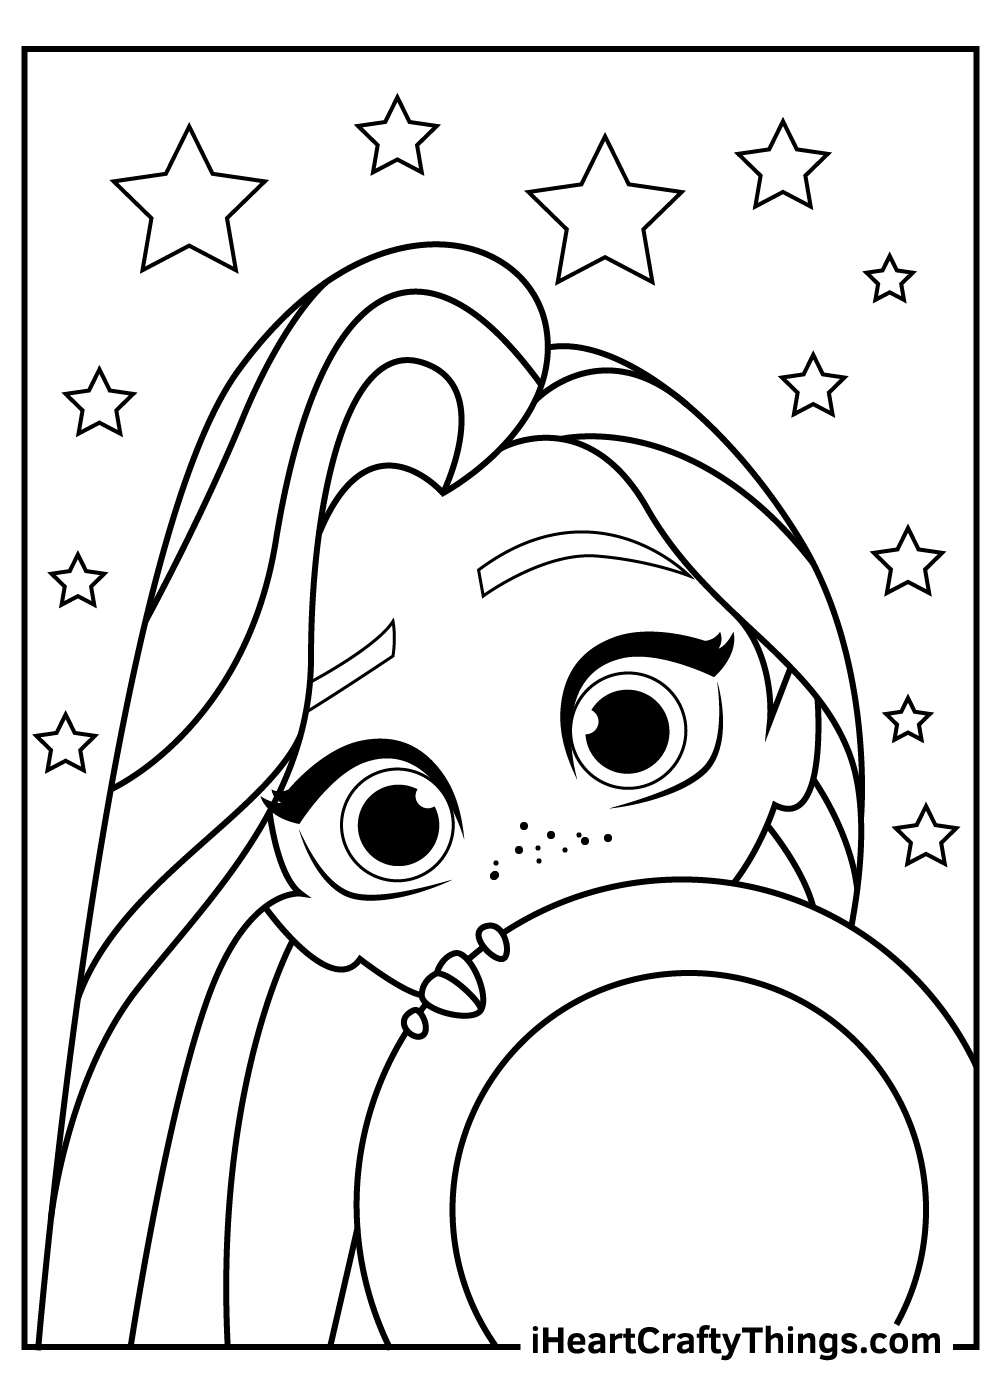 Rapunzel Coloring Pages Updated 20